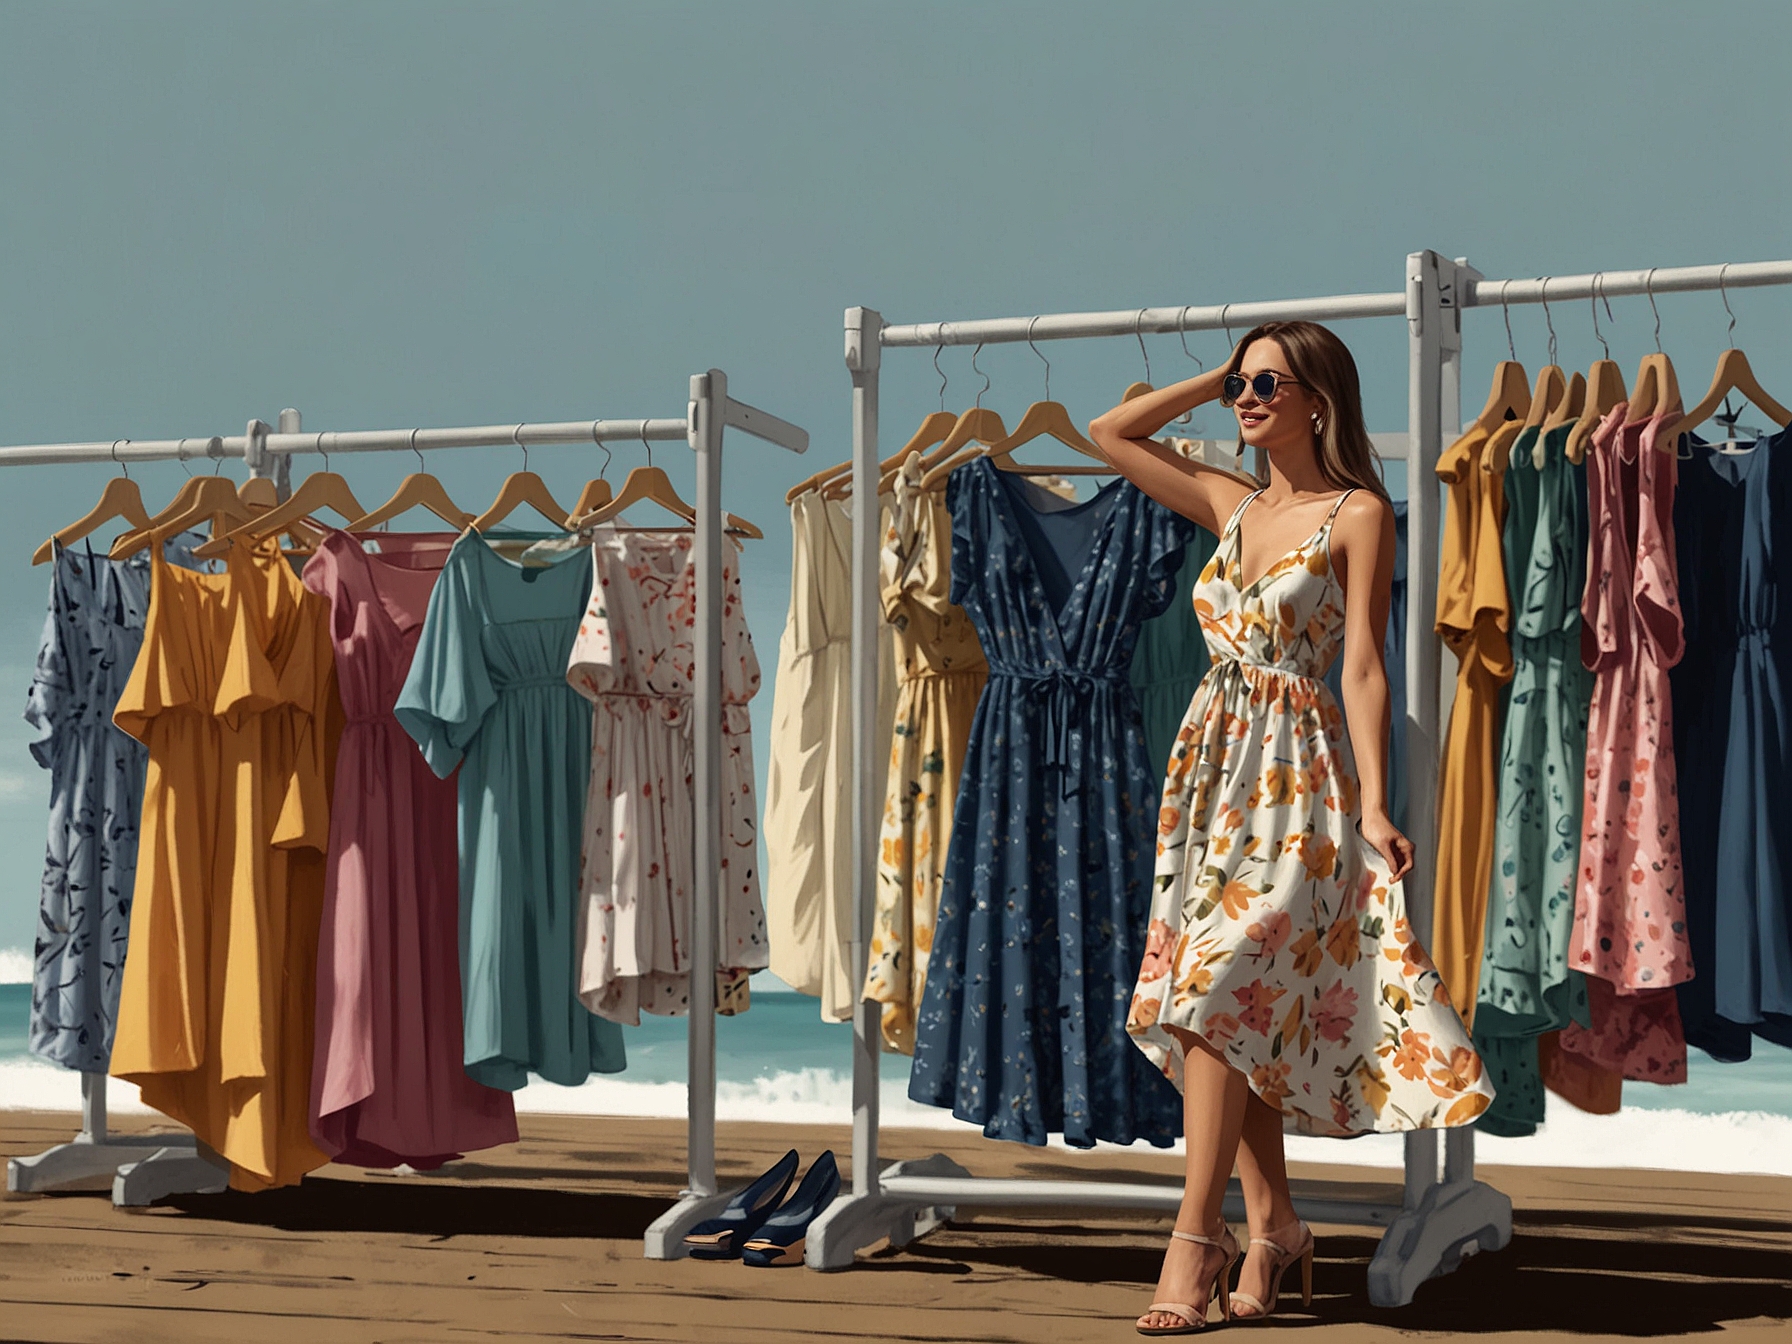 A shopper holding up a stunning summer dress in front of a clothing rack at a secret outlet store, showcasing affordable and stylish options perfect for a beachside holiday.